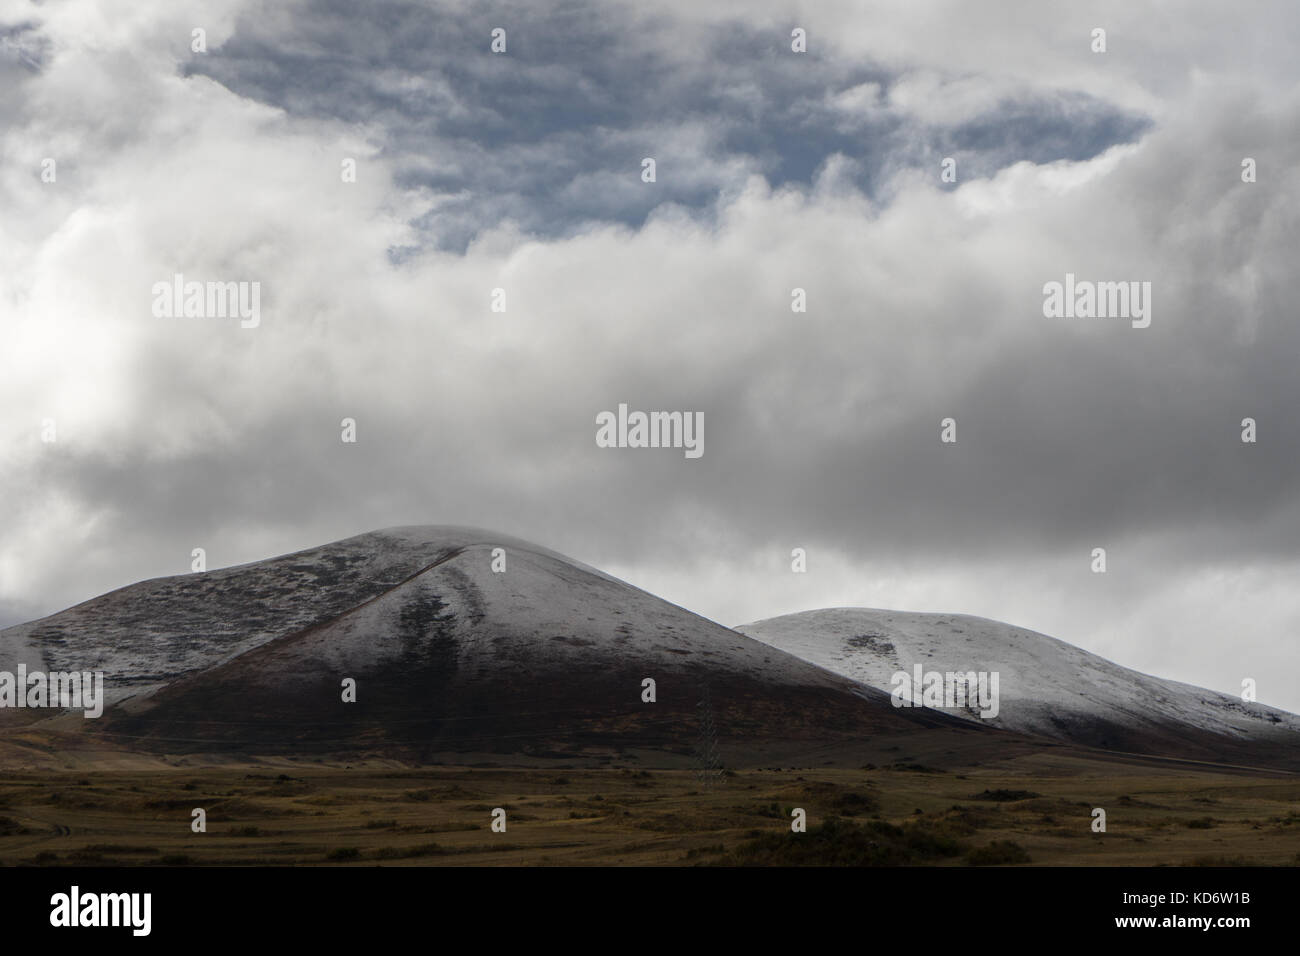 Valley, clouds and sky above the mountains in Armenia horizontal Stock Photo